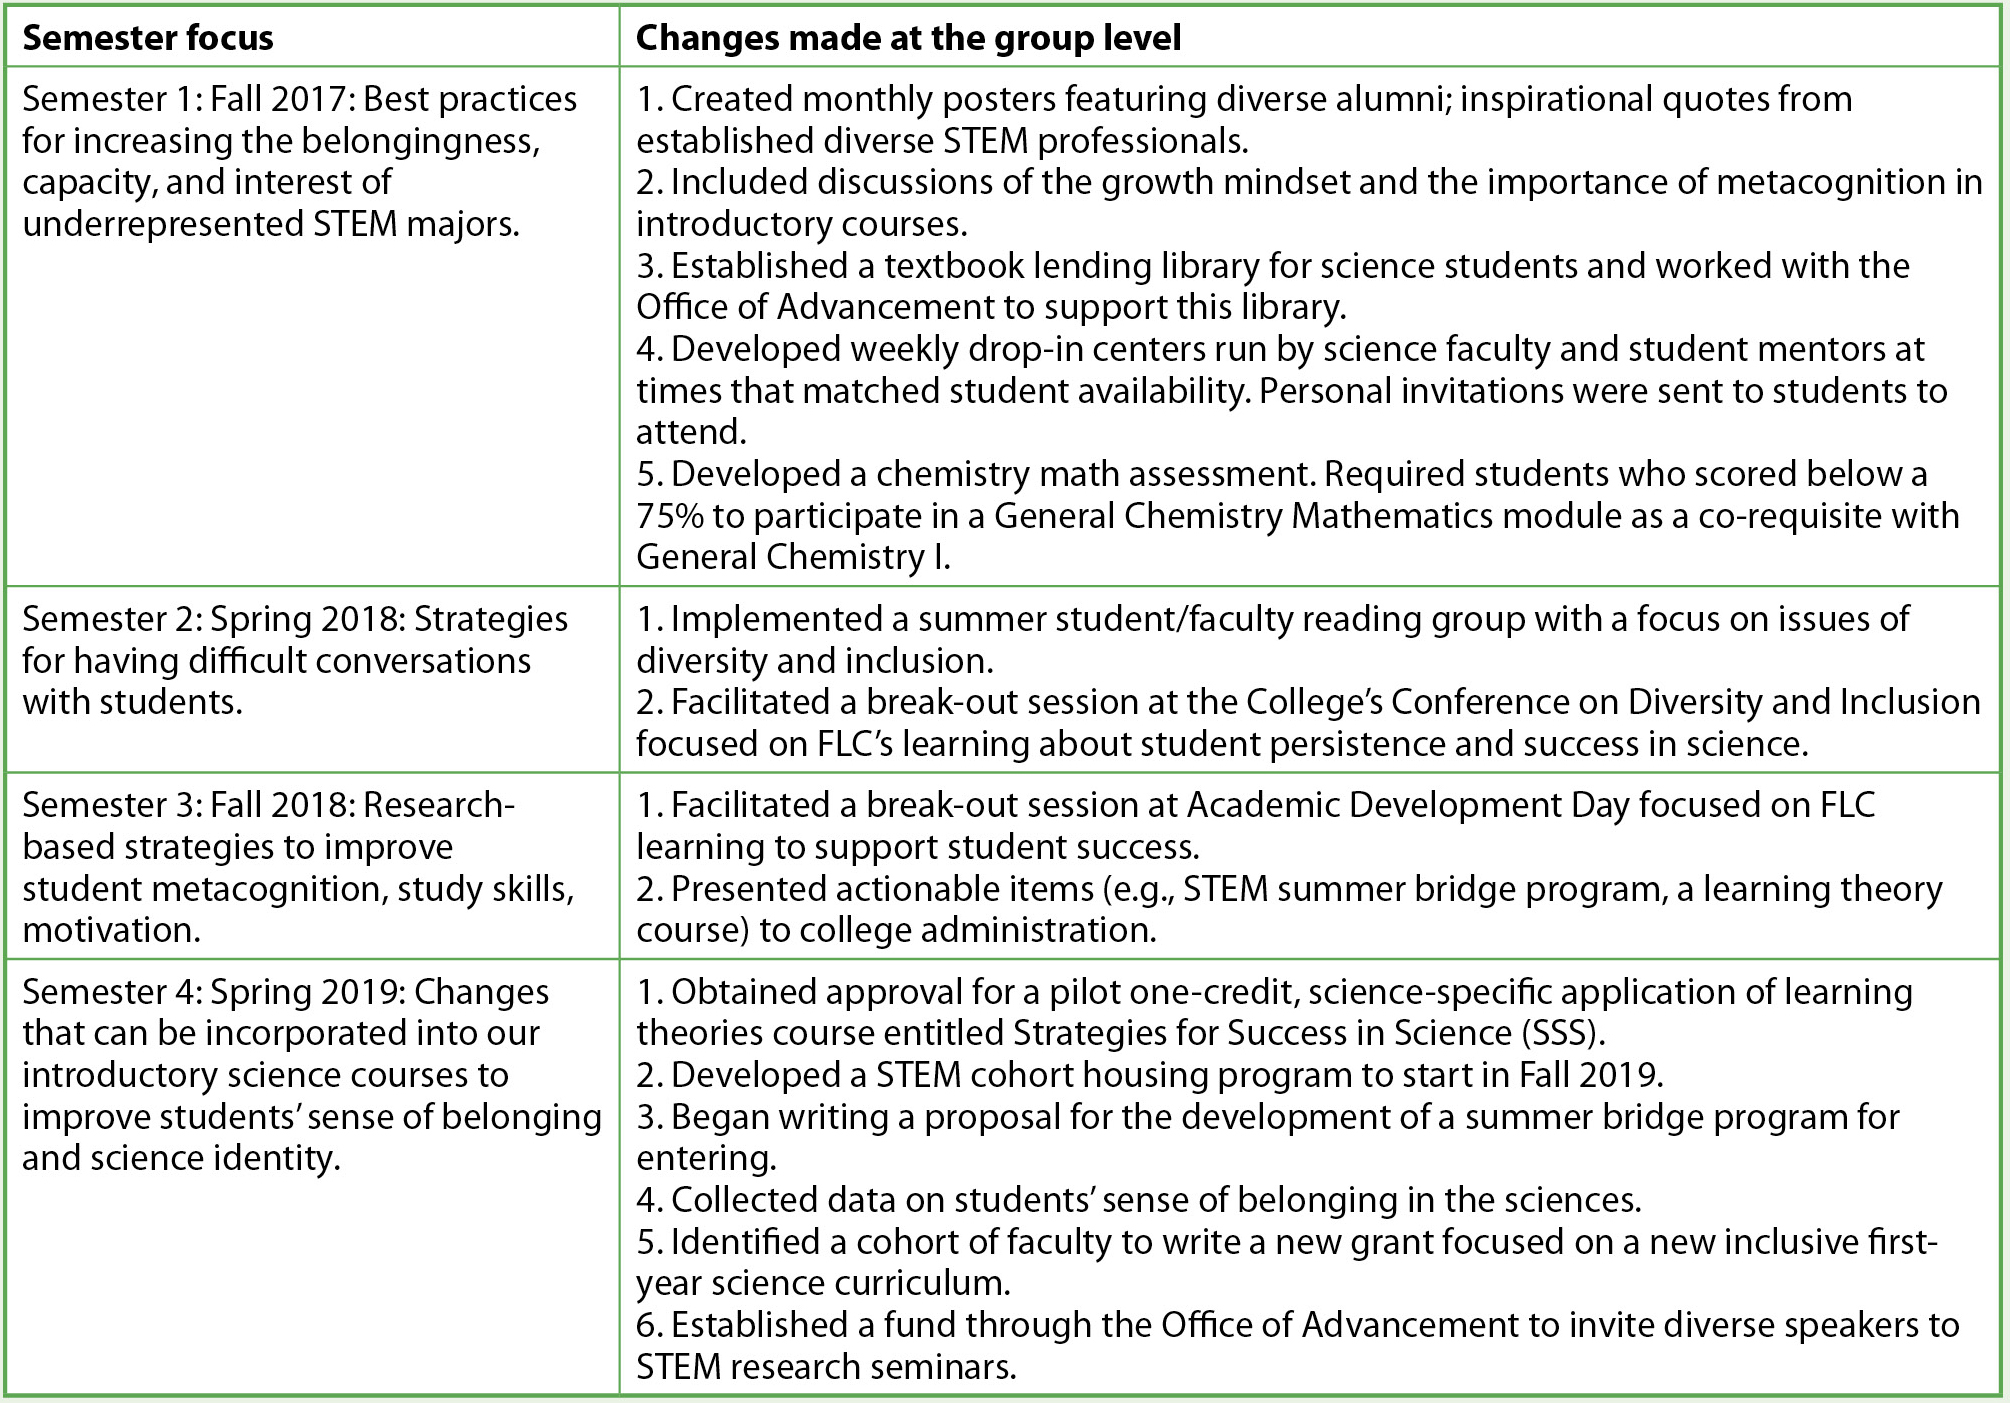 Changes at the group level after faculty learning community involvement.